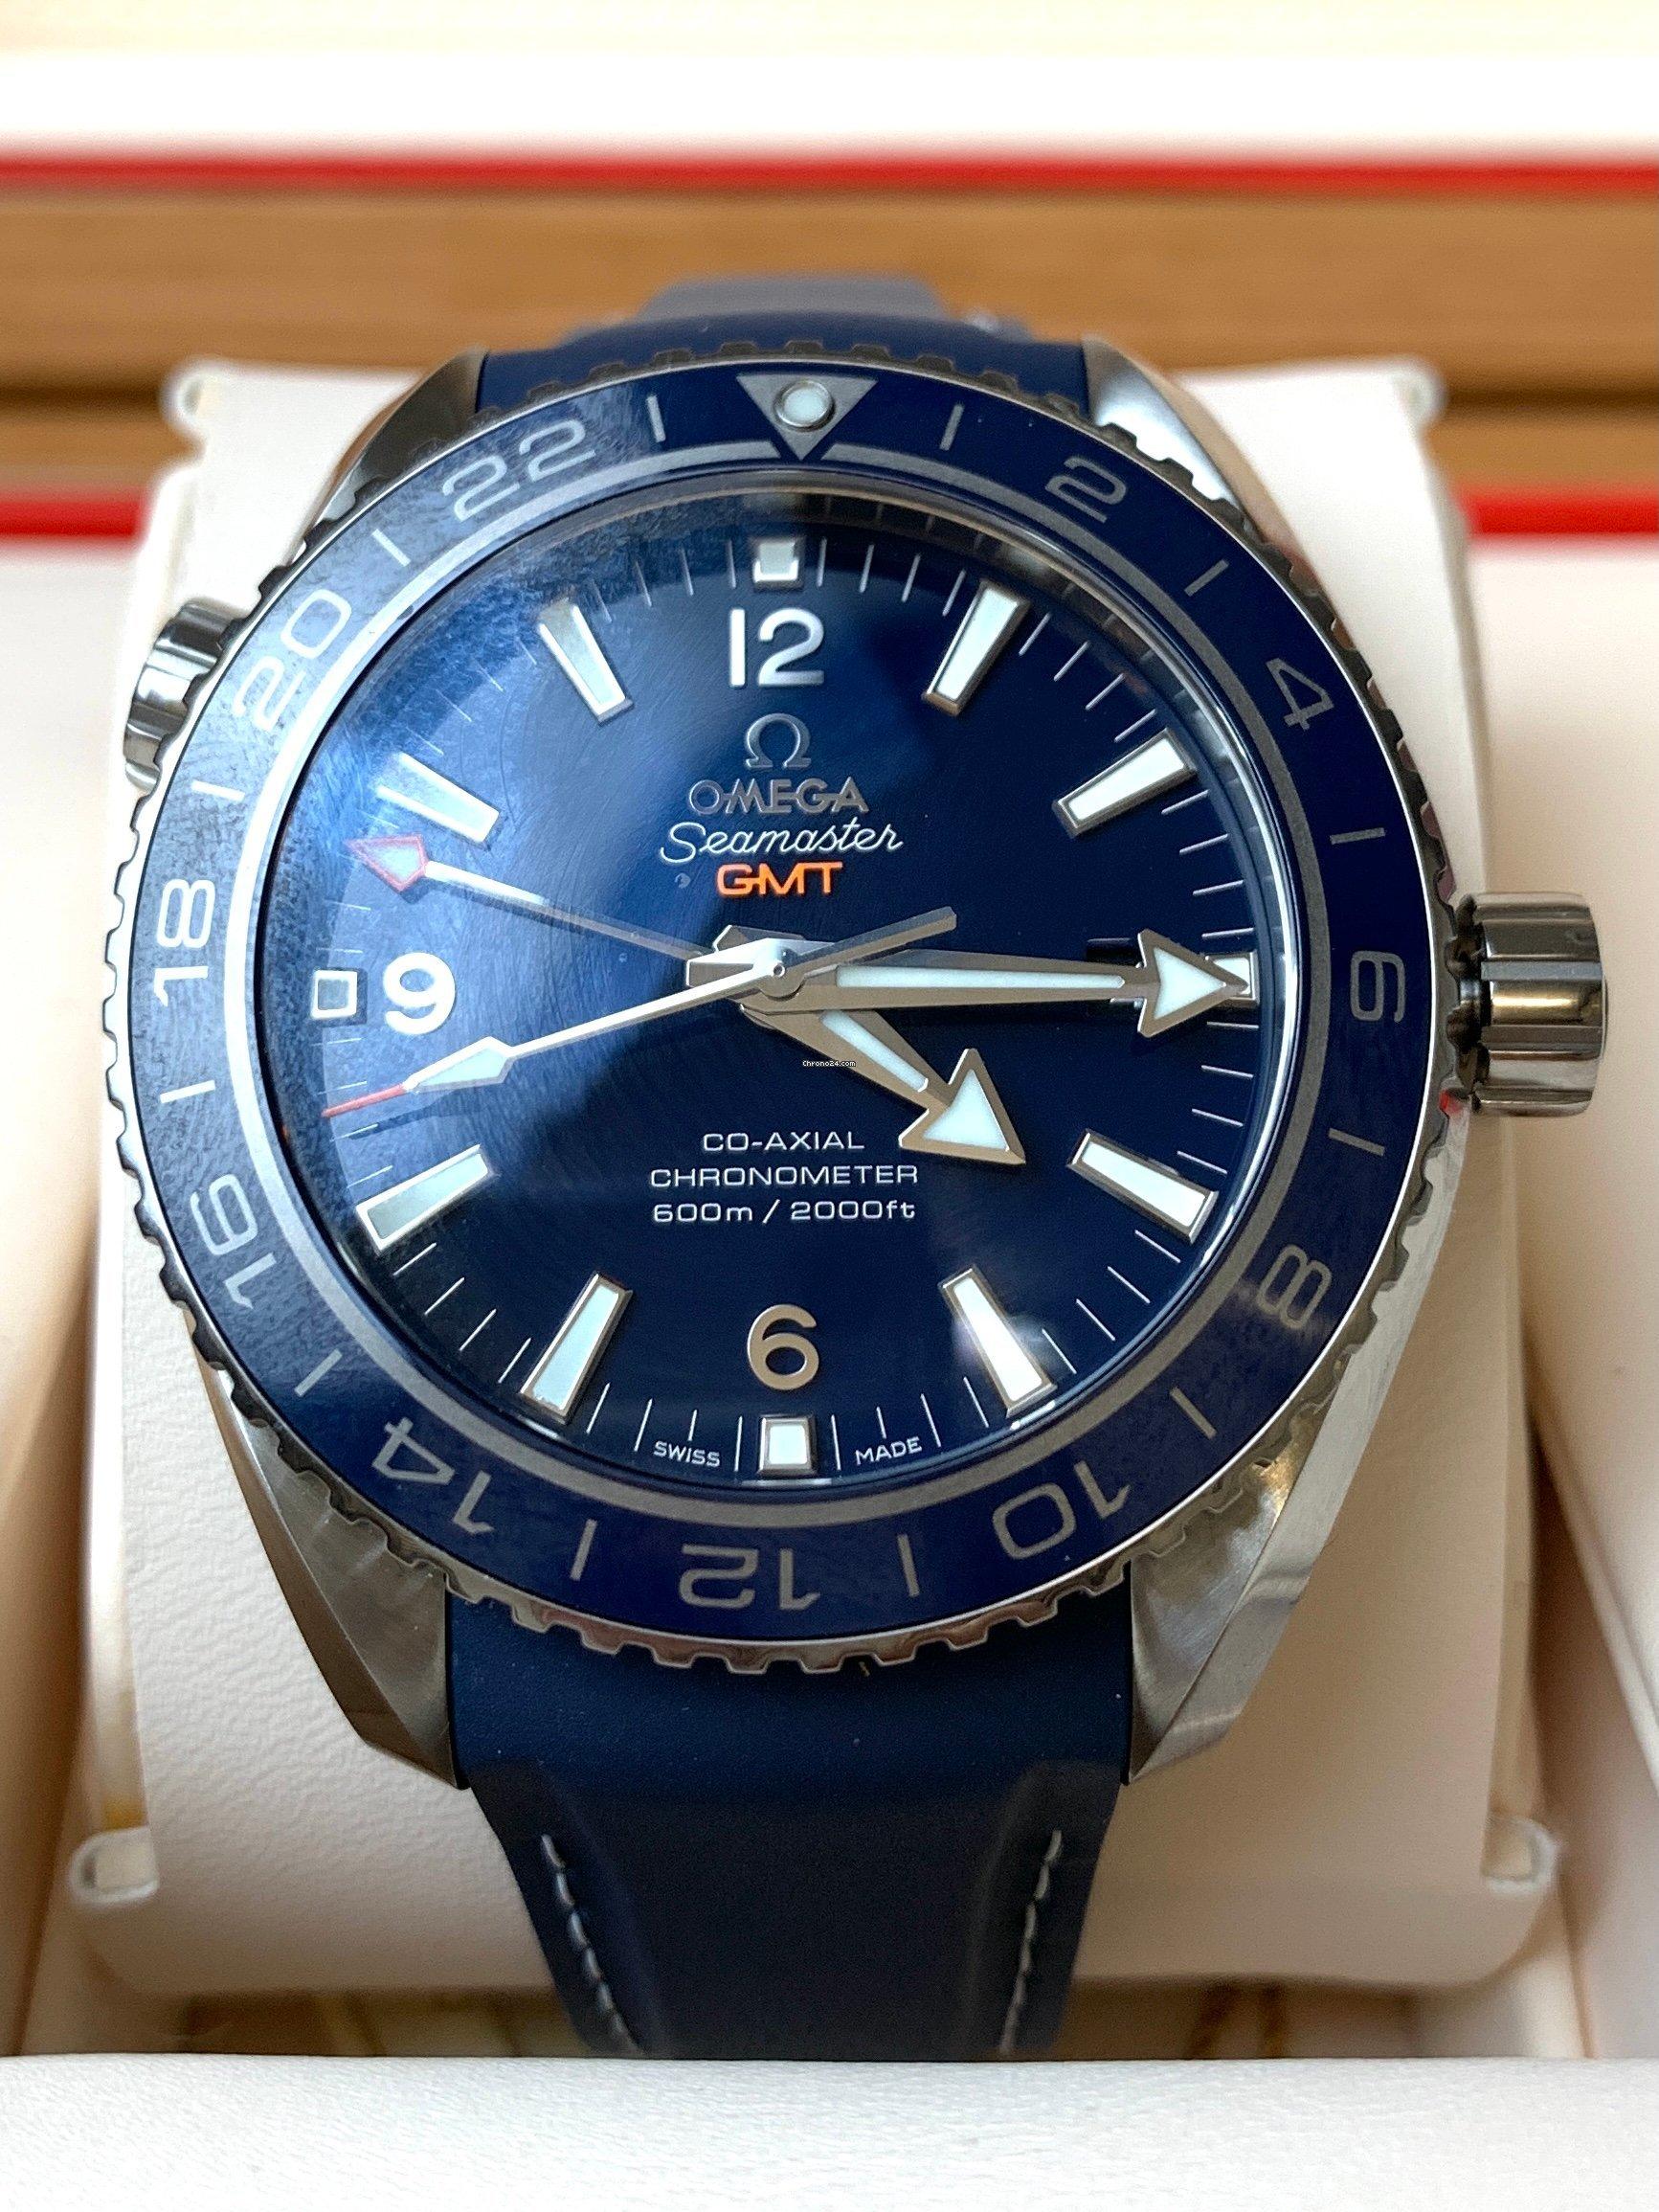 Beautiful, mint condition, never been worn Omega Planet Ocean blue Seamaster.
232.92.44.22.03.001 
Comes with full set, box, original papers and warranty card.
Blue dial, Titanium case, automatic movement.
Year of production 2020.